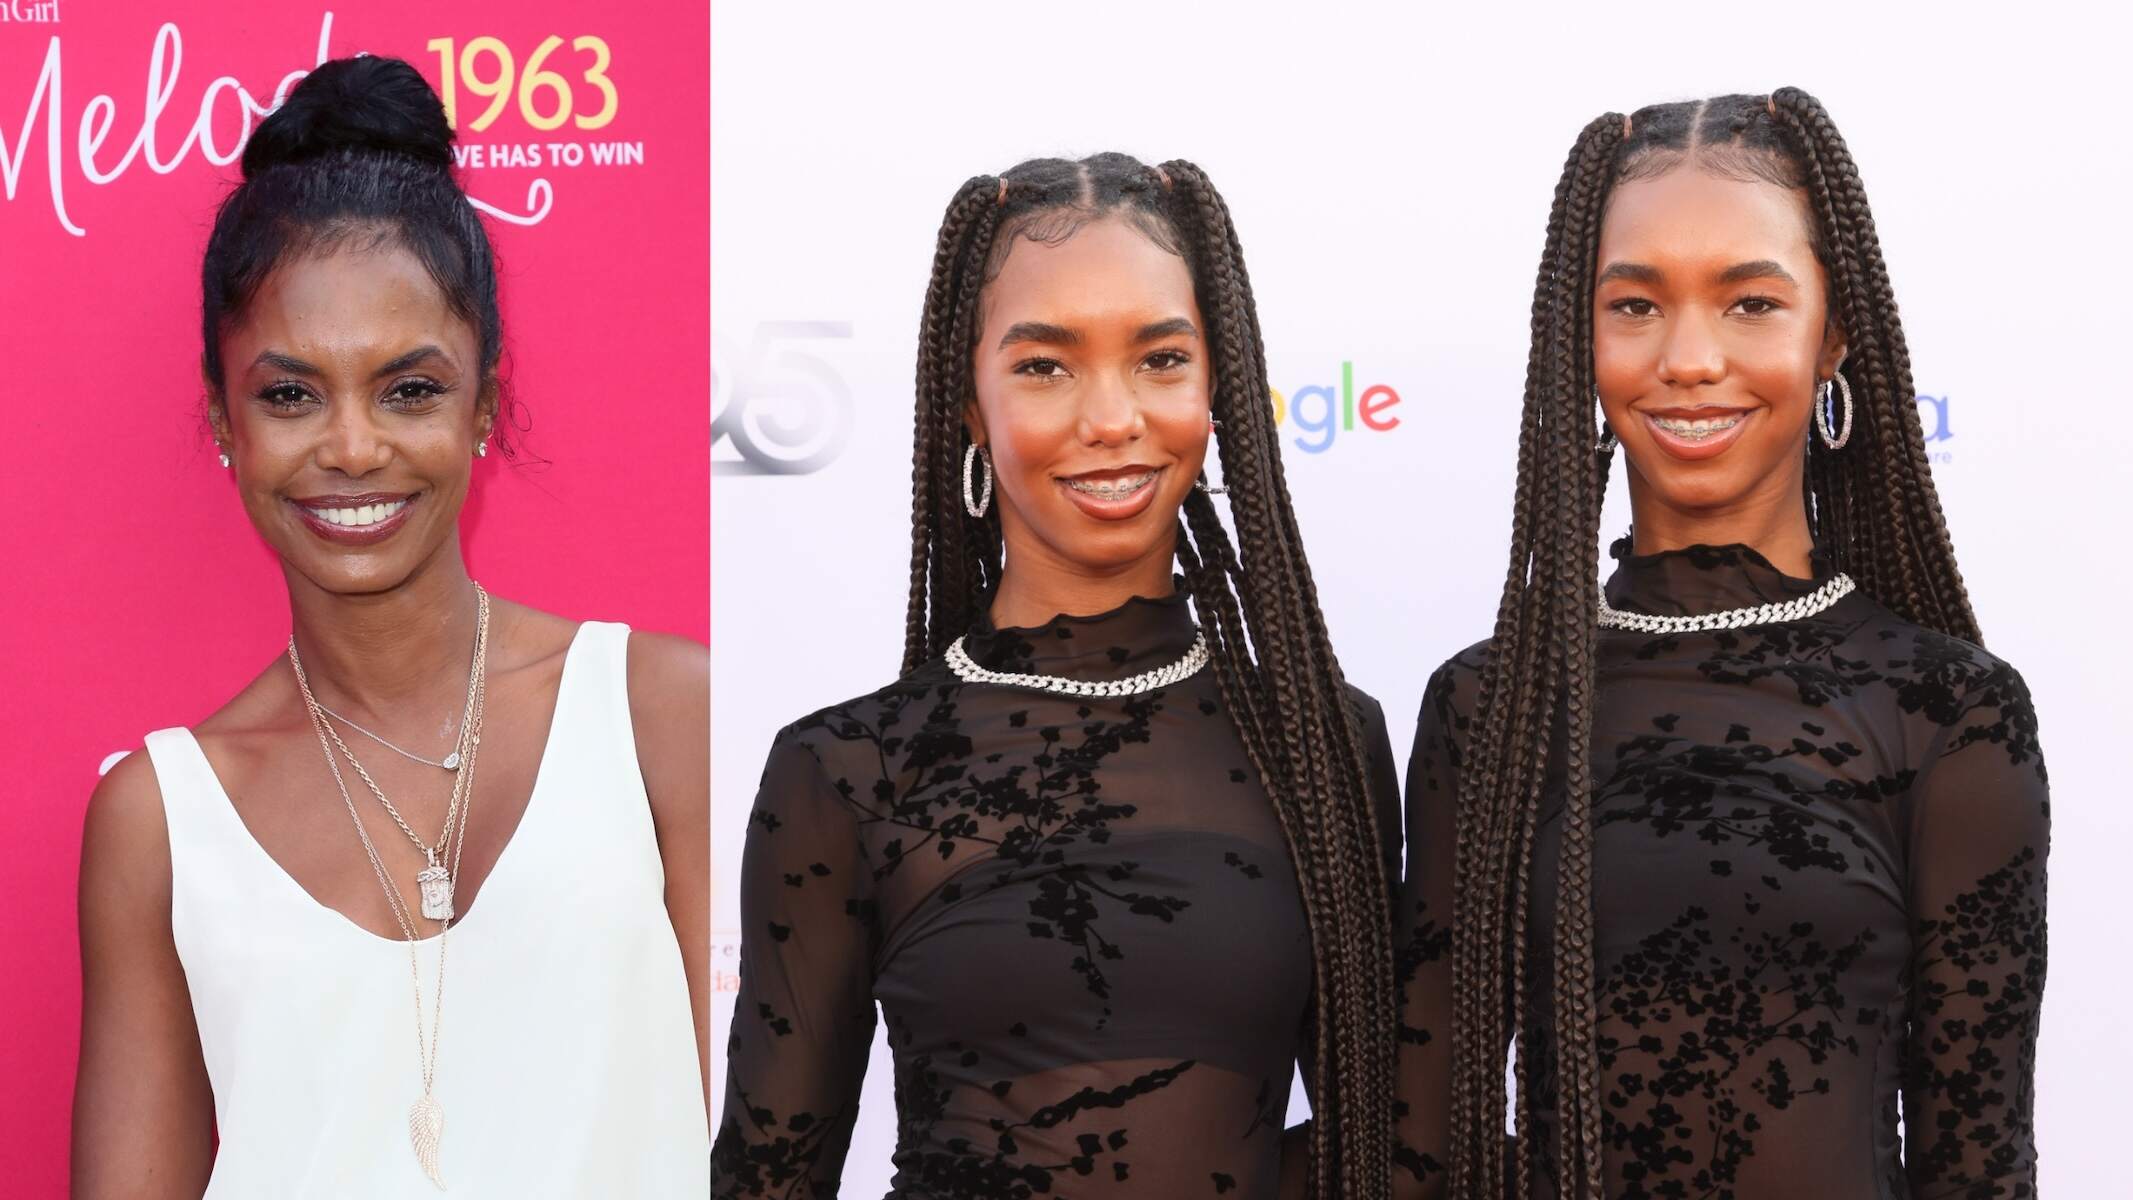 A photo of Kim Porter in a white top alongside a photo of Jessie and D'Lila in black lace dresses